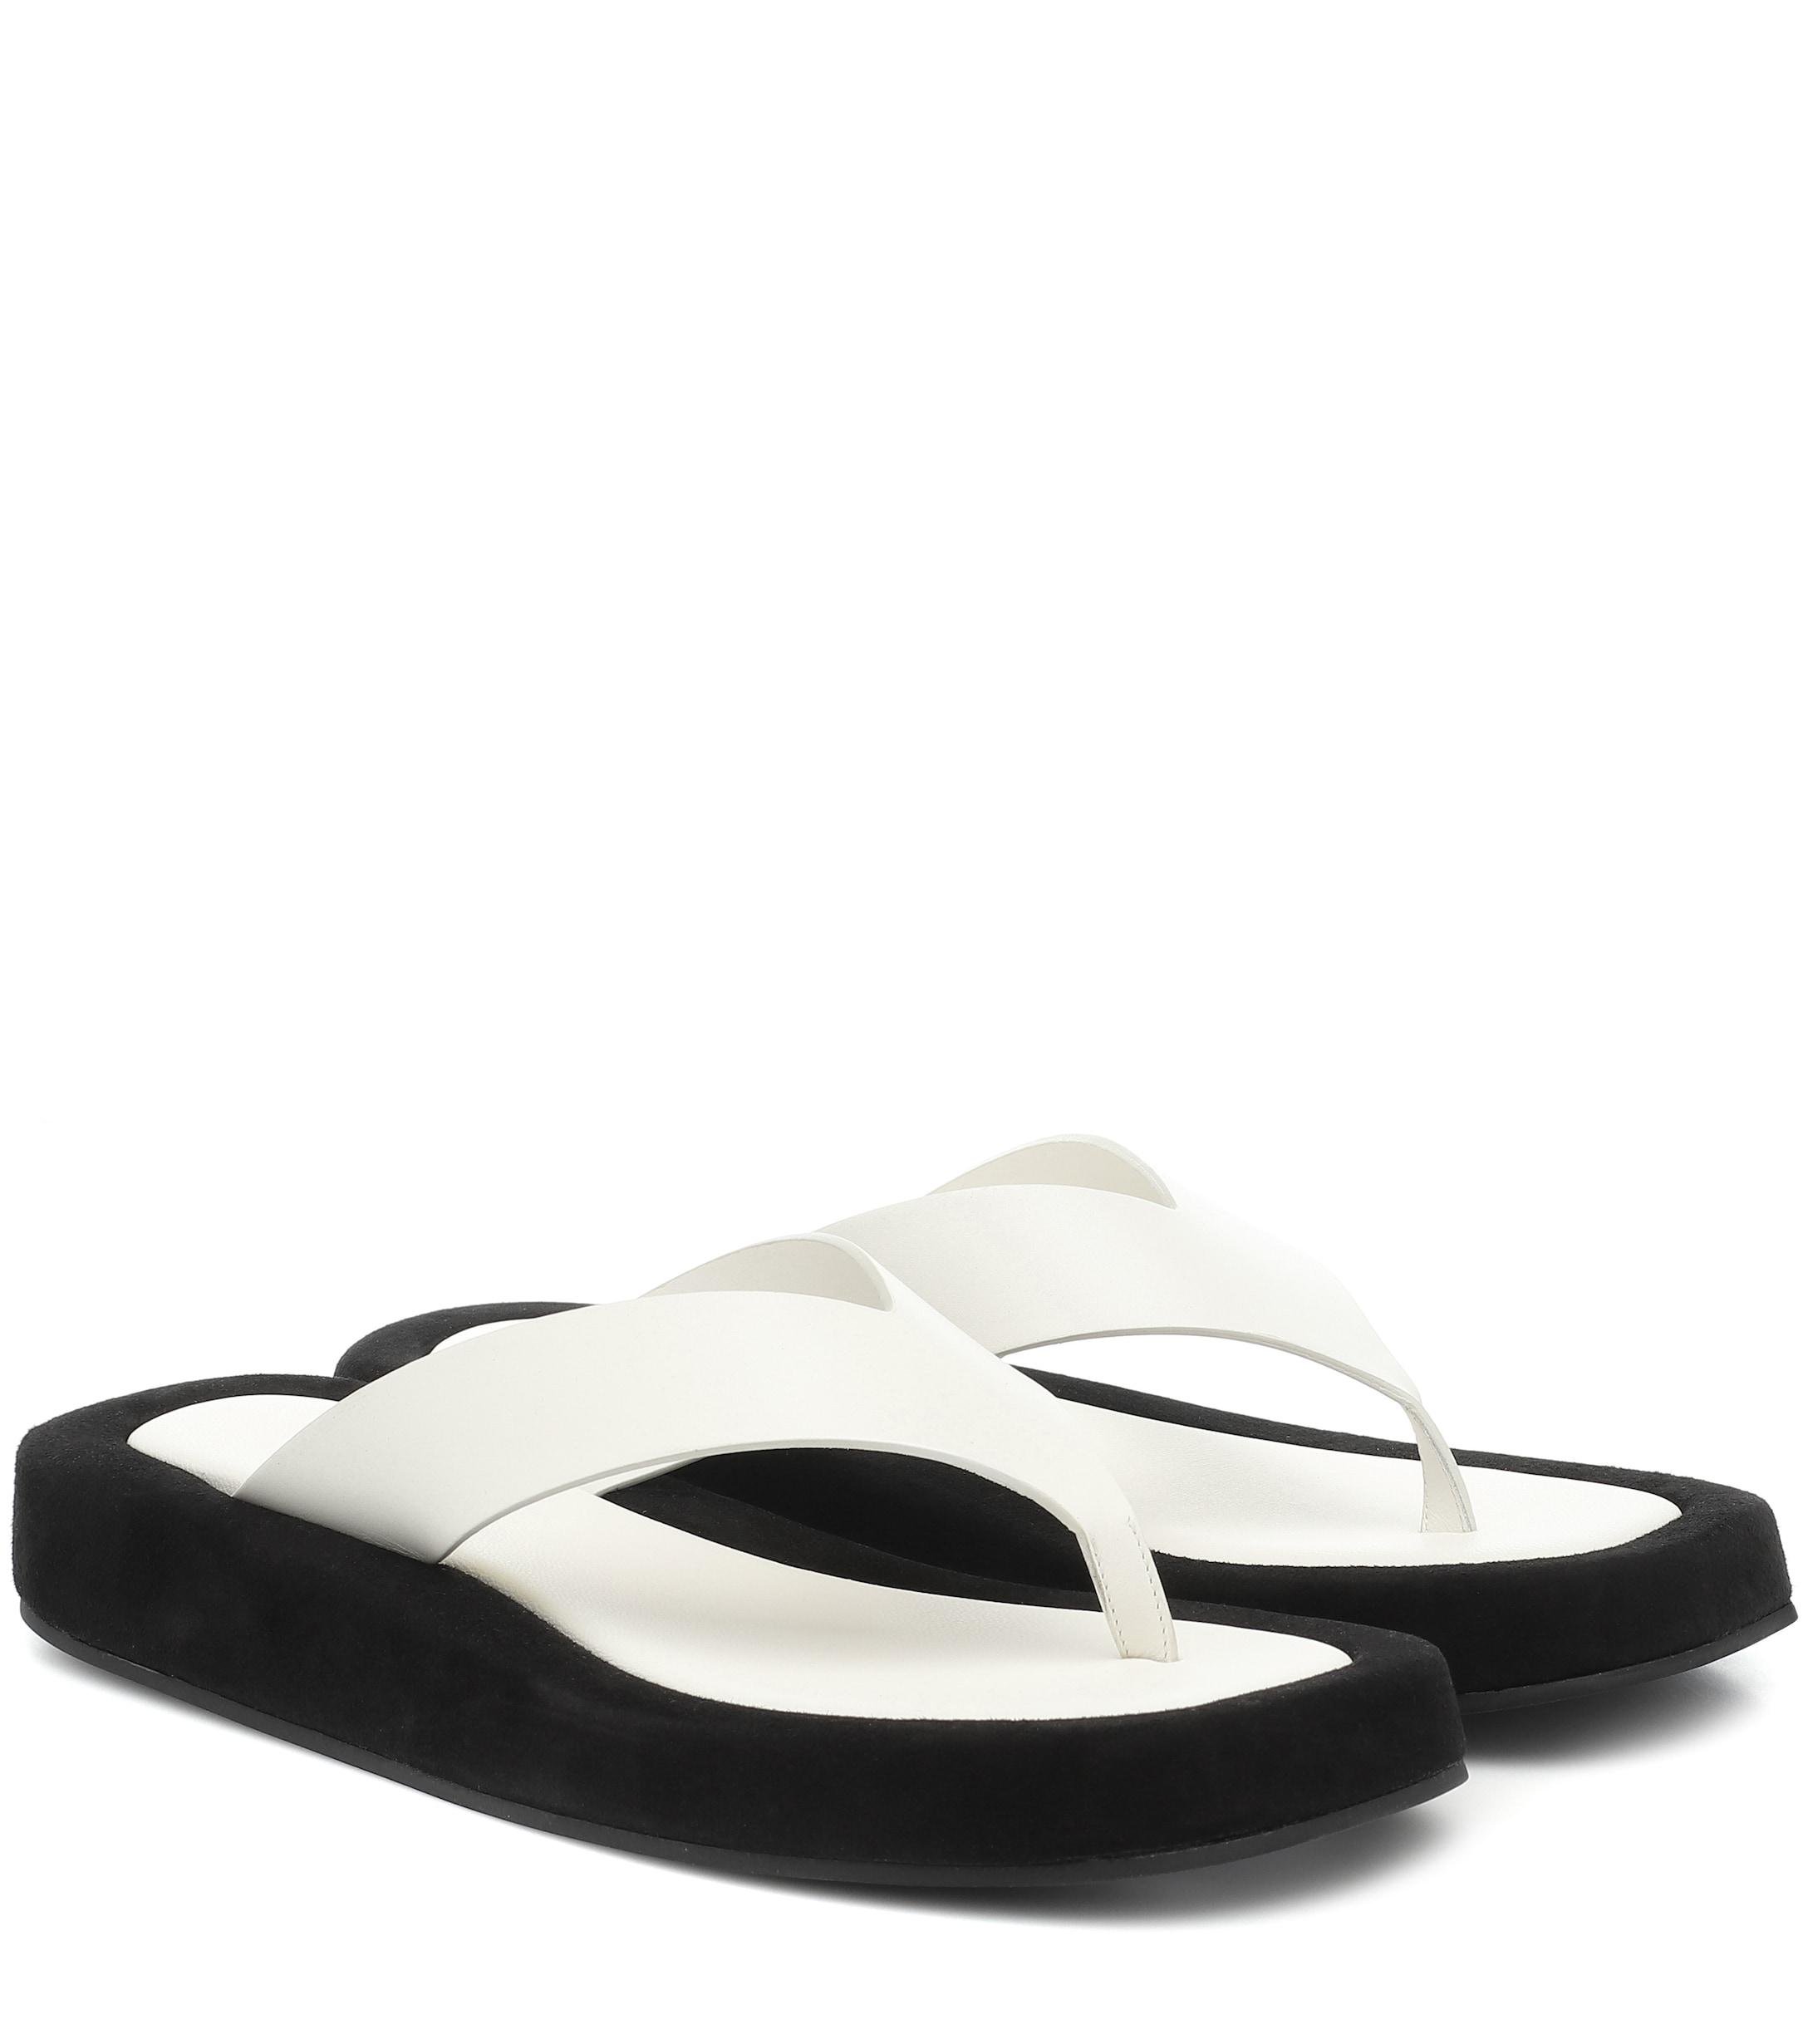 The Row Ginza Leather Sandals in WhiteBlack.jpeg